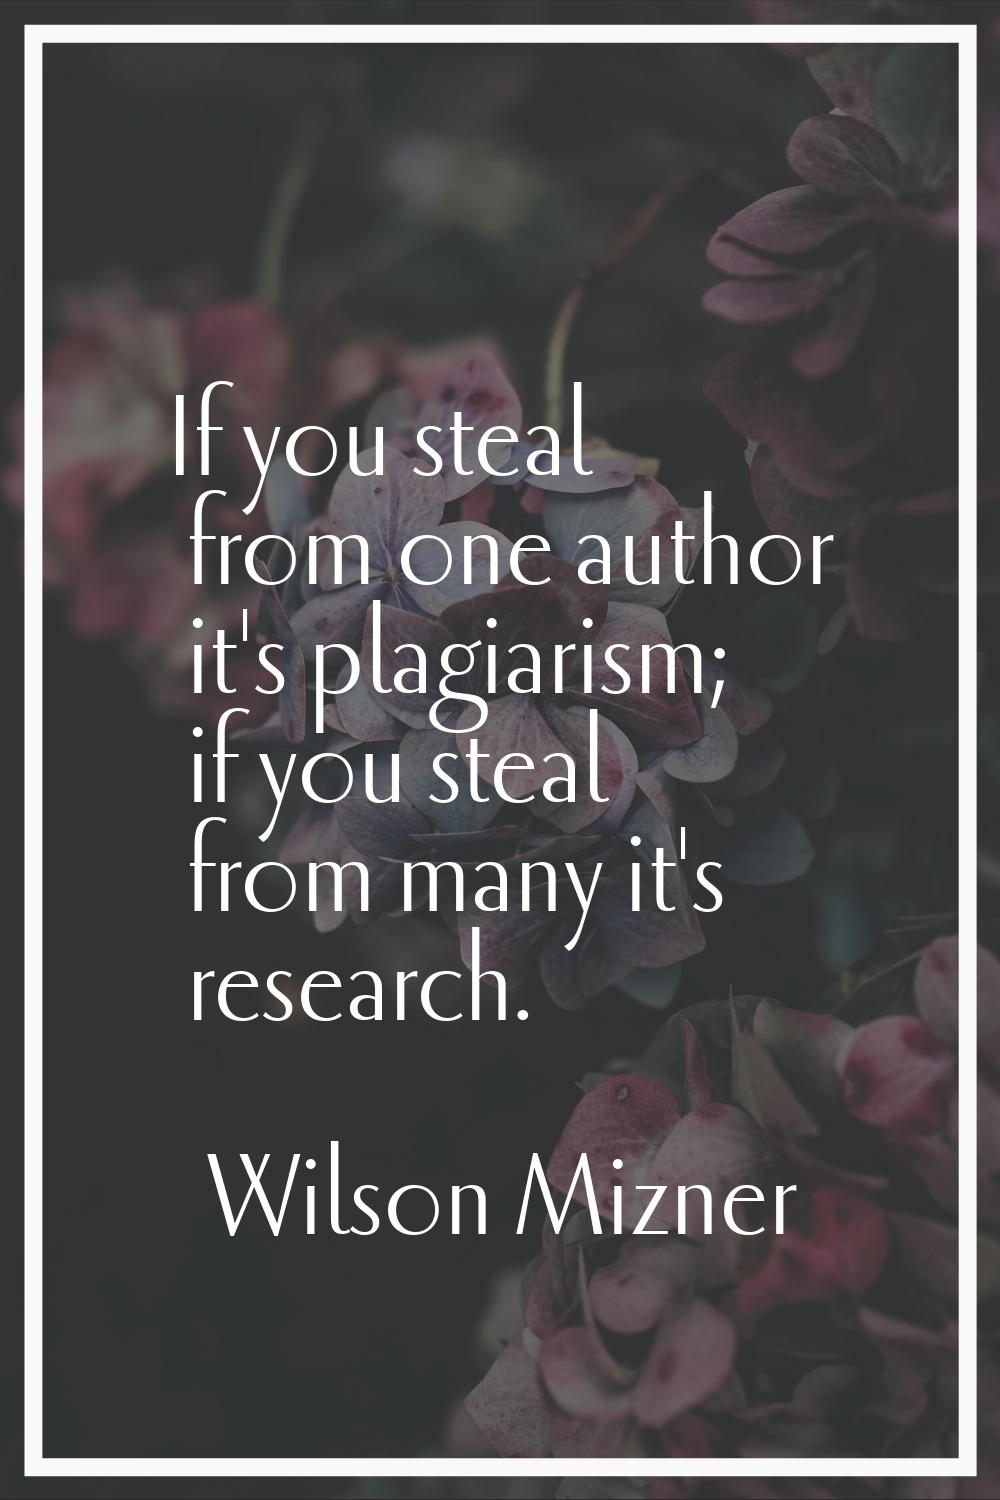 If you steal from one author it's plagiarism; if you steal from many it's research.